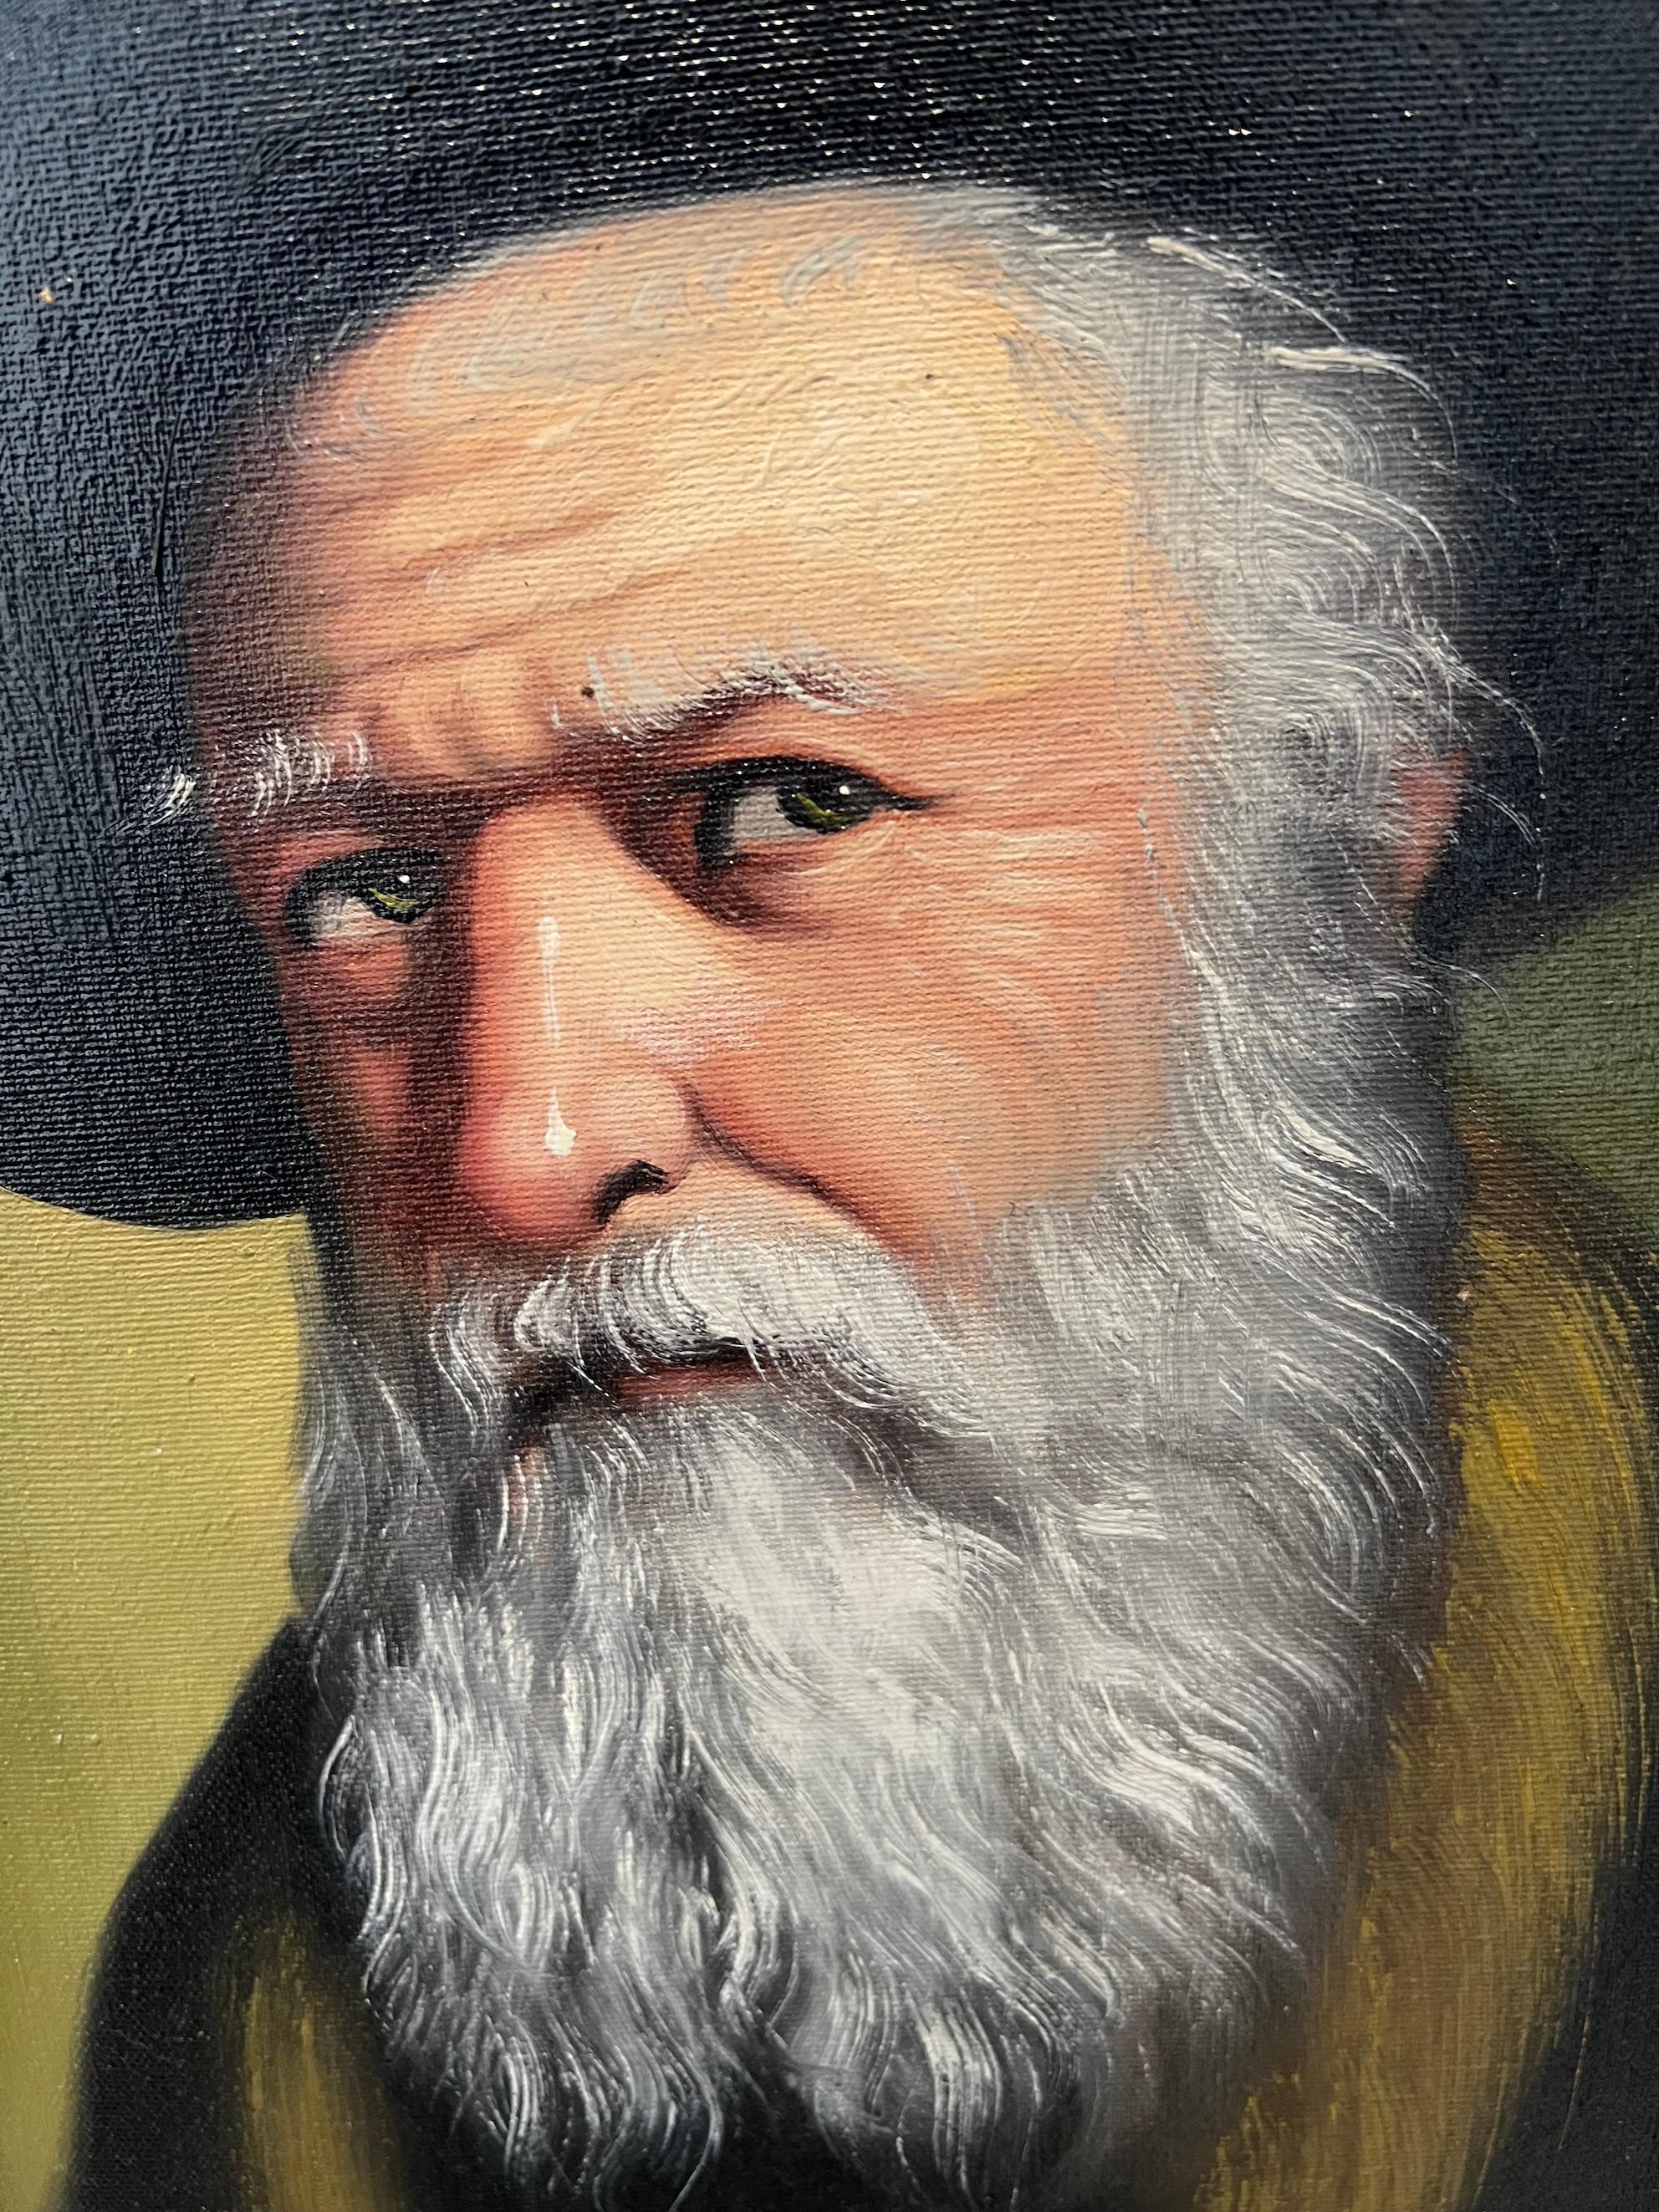 Oil painting on canvas depicting the portrait of a rabbi by David Pelbam, US artist.

Artist David Pelbam was born in Rhode Island in 1932. His creativity was inspired by the shipyard where his father worked, and he often used dockworkers and ship